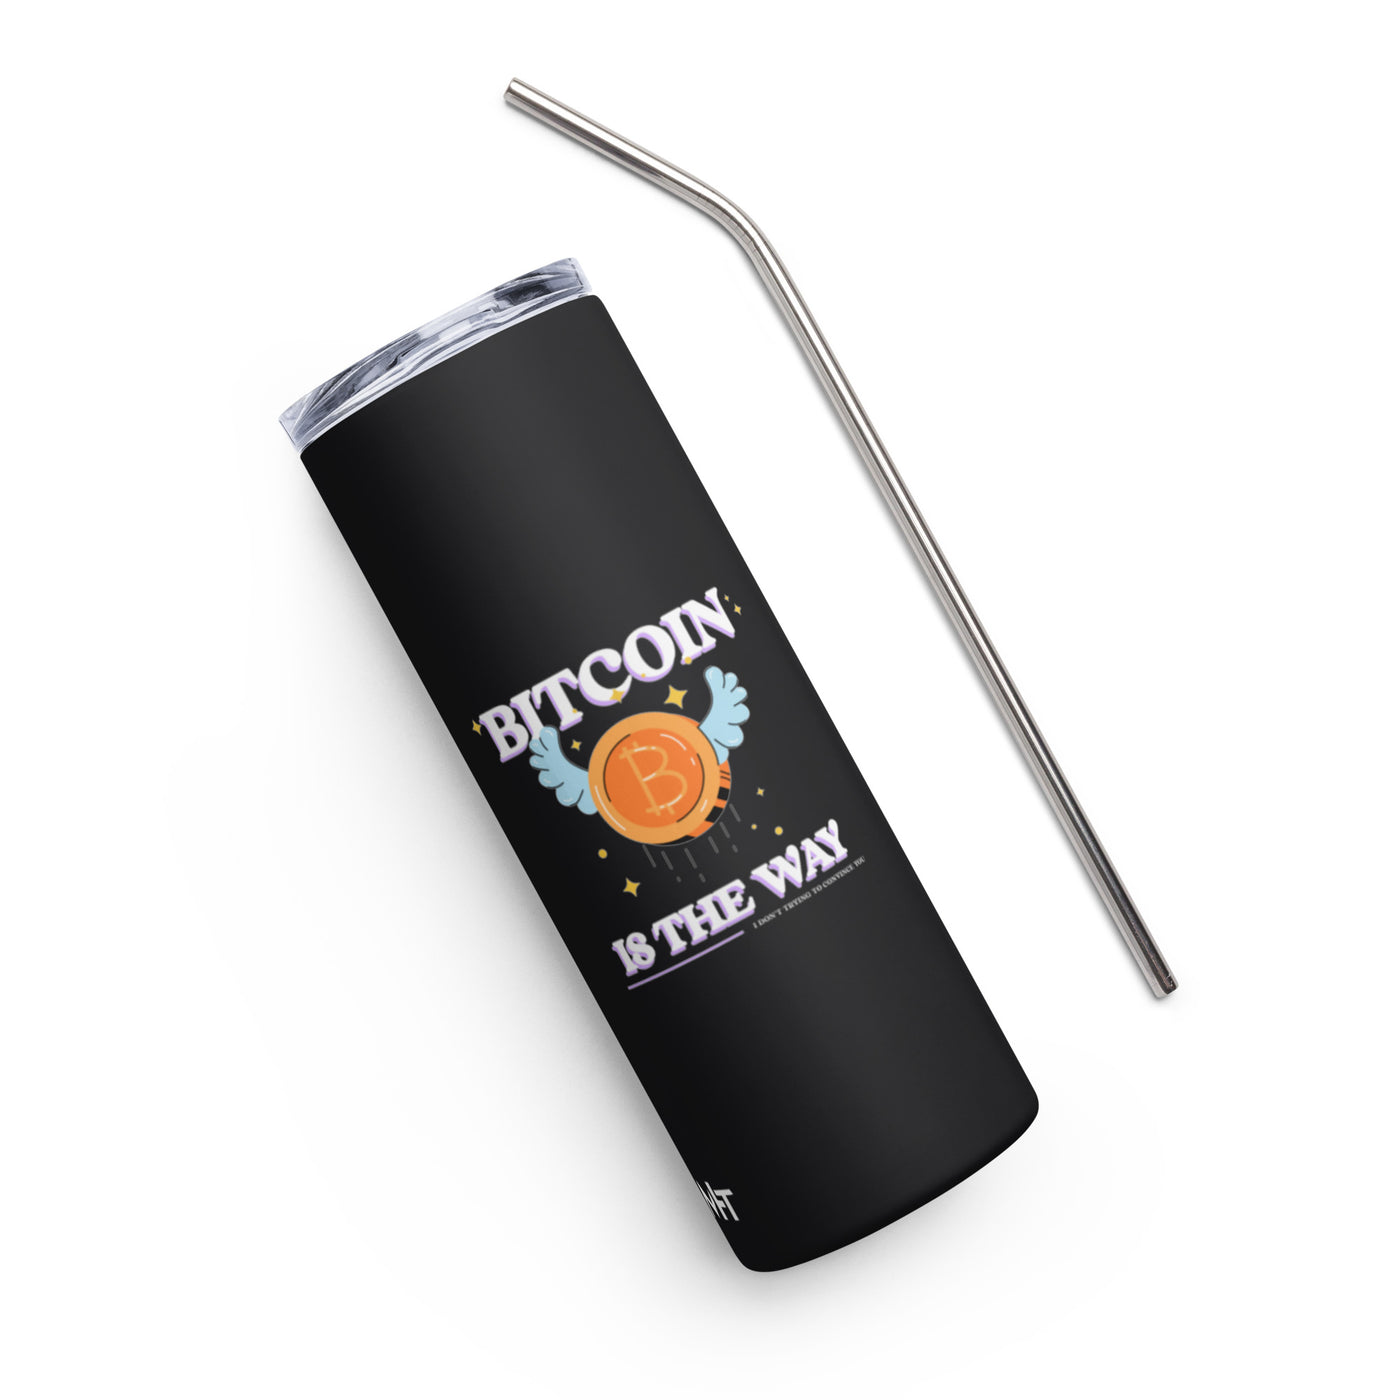 Bitcoin is the way - Stainless steel tumbler